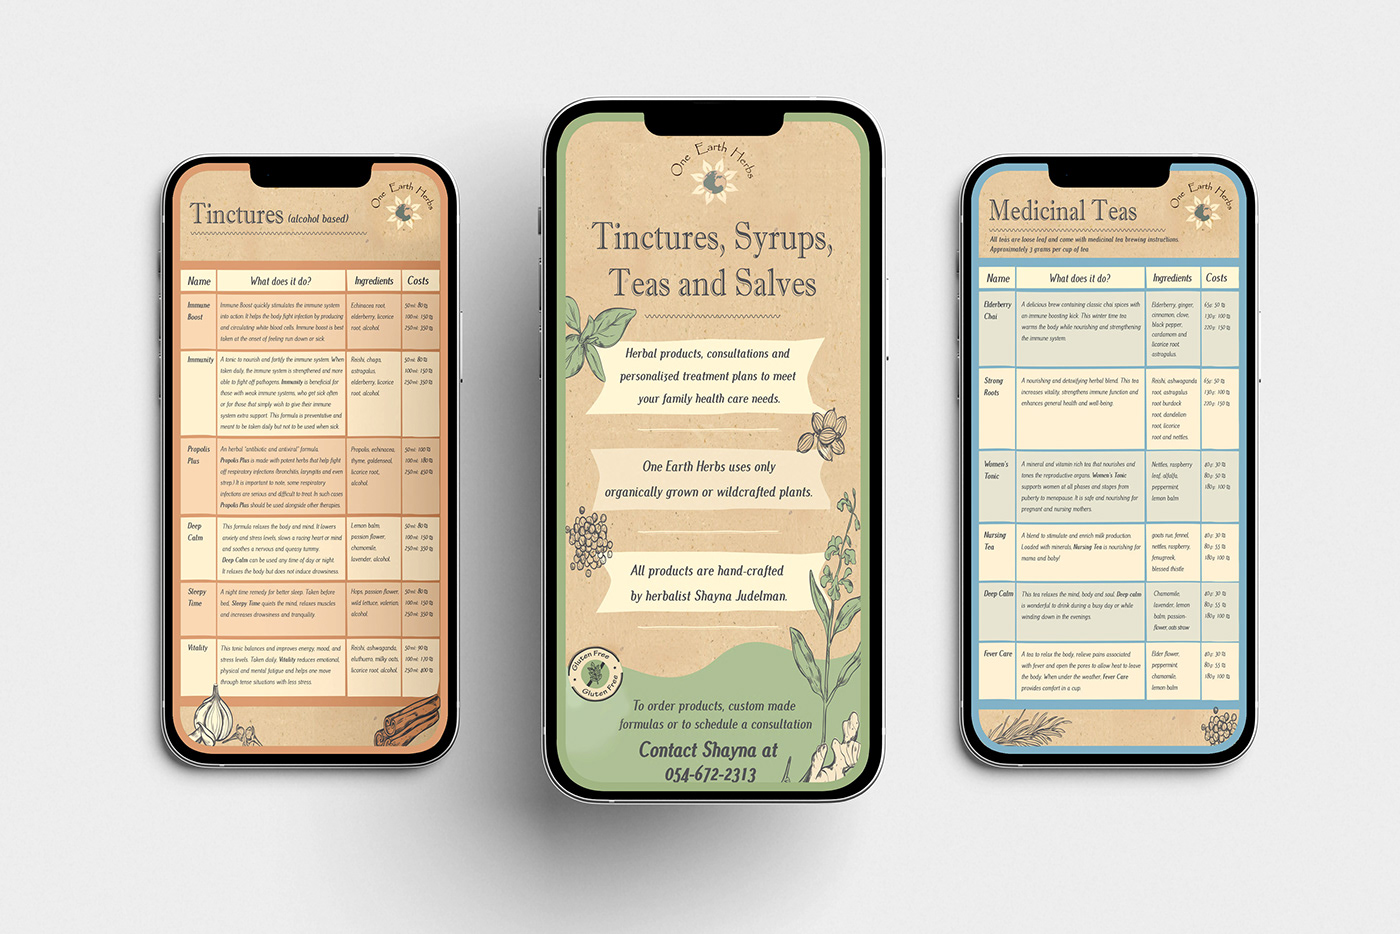 "One Earth Herbs" Product List / Mobile